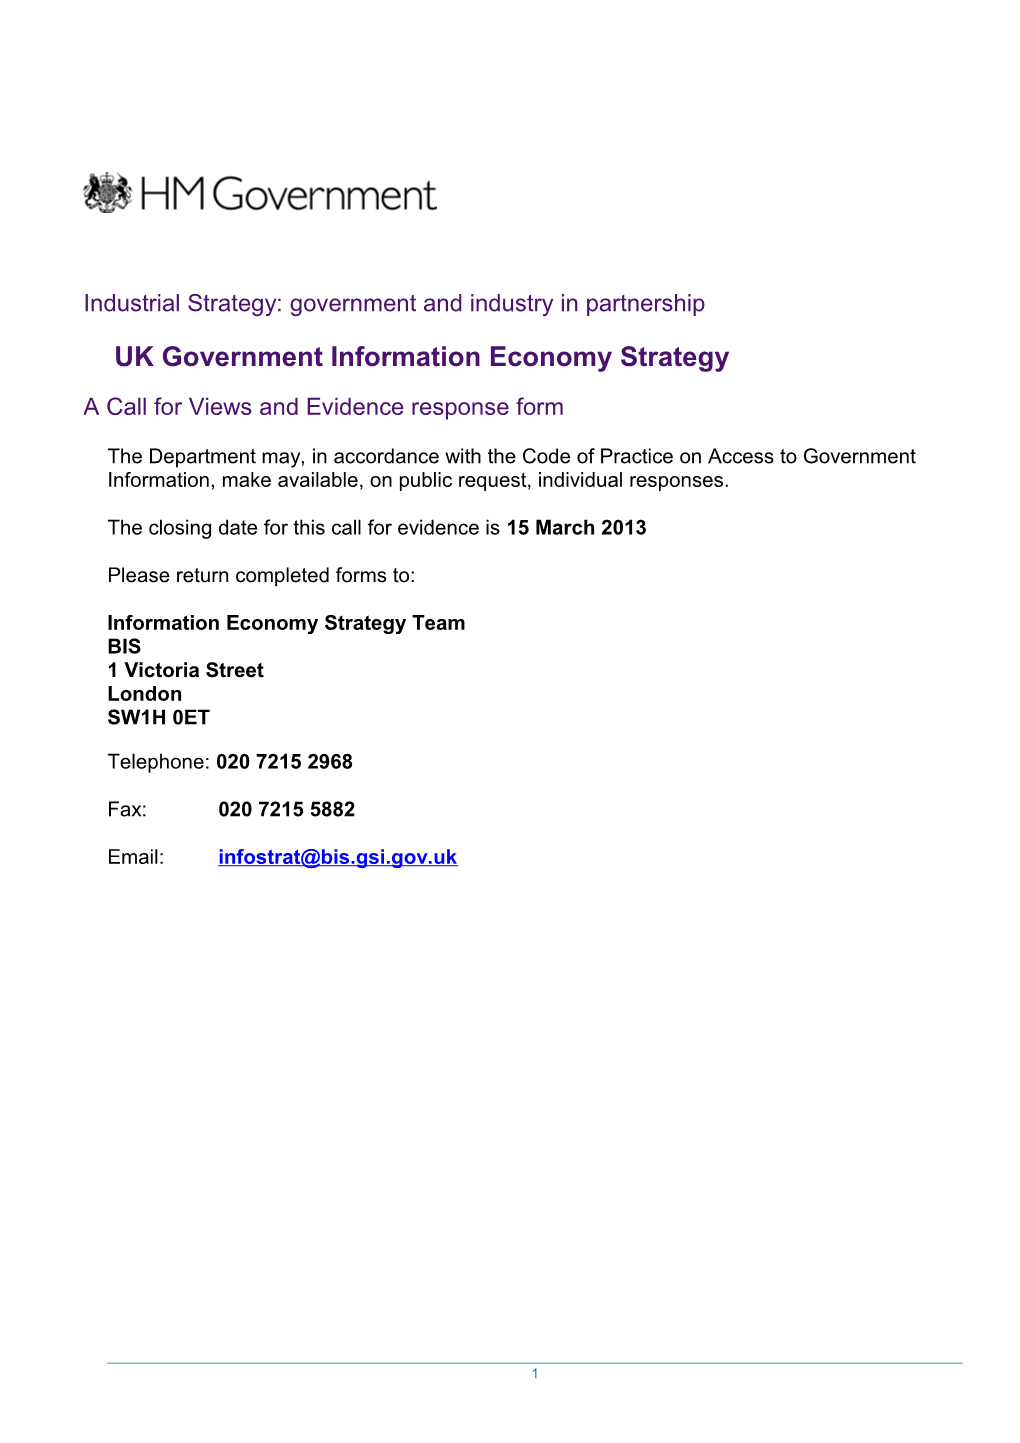 UK Government Information Economy Strategy: Call for Views and Evidence - Response Form